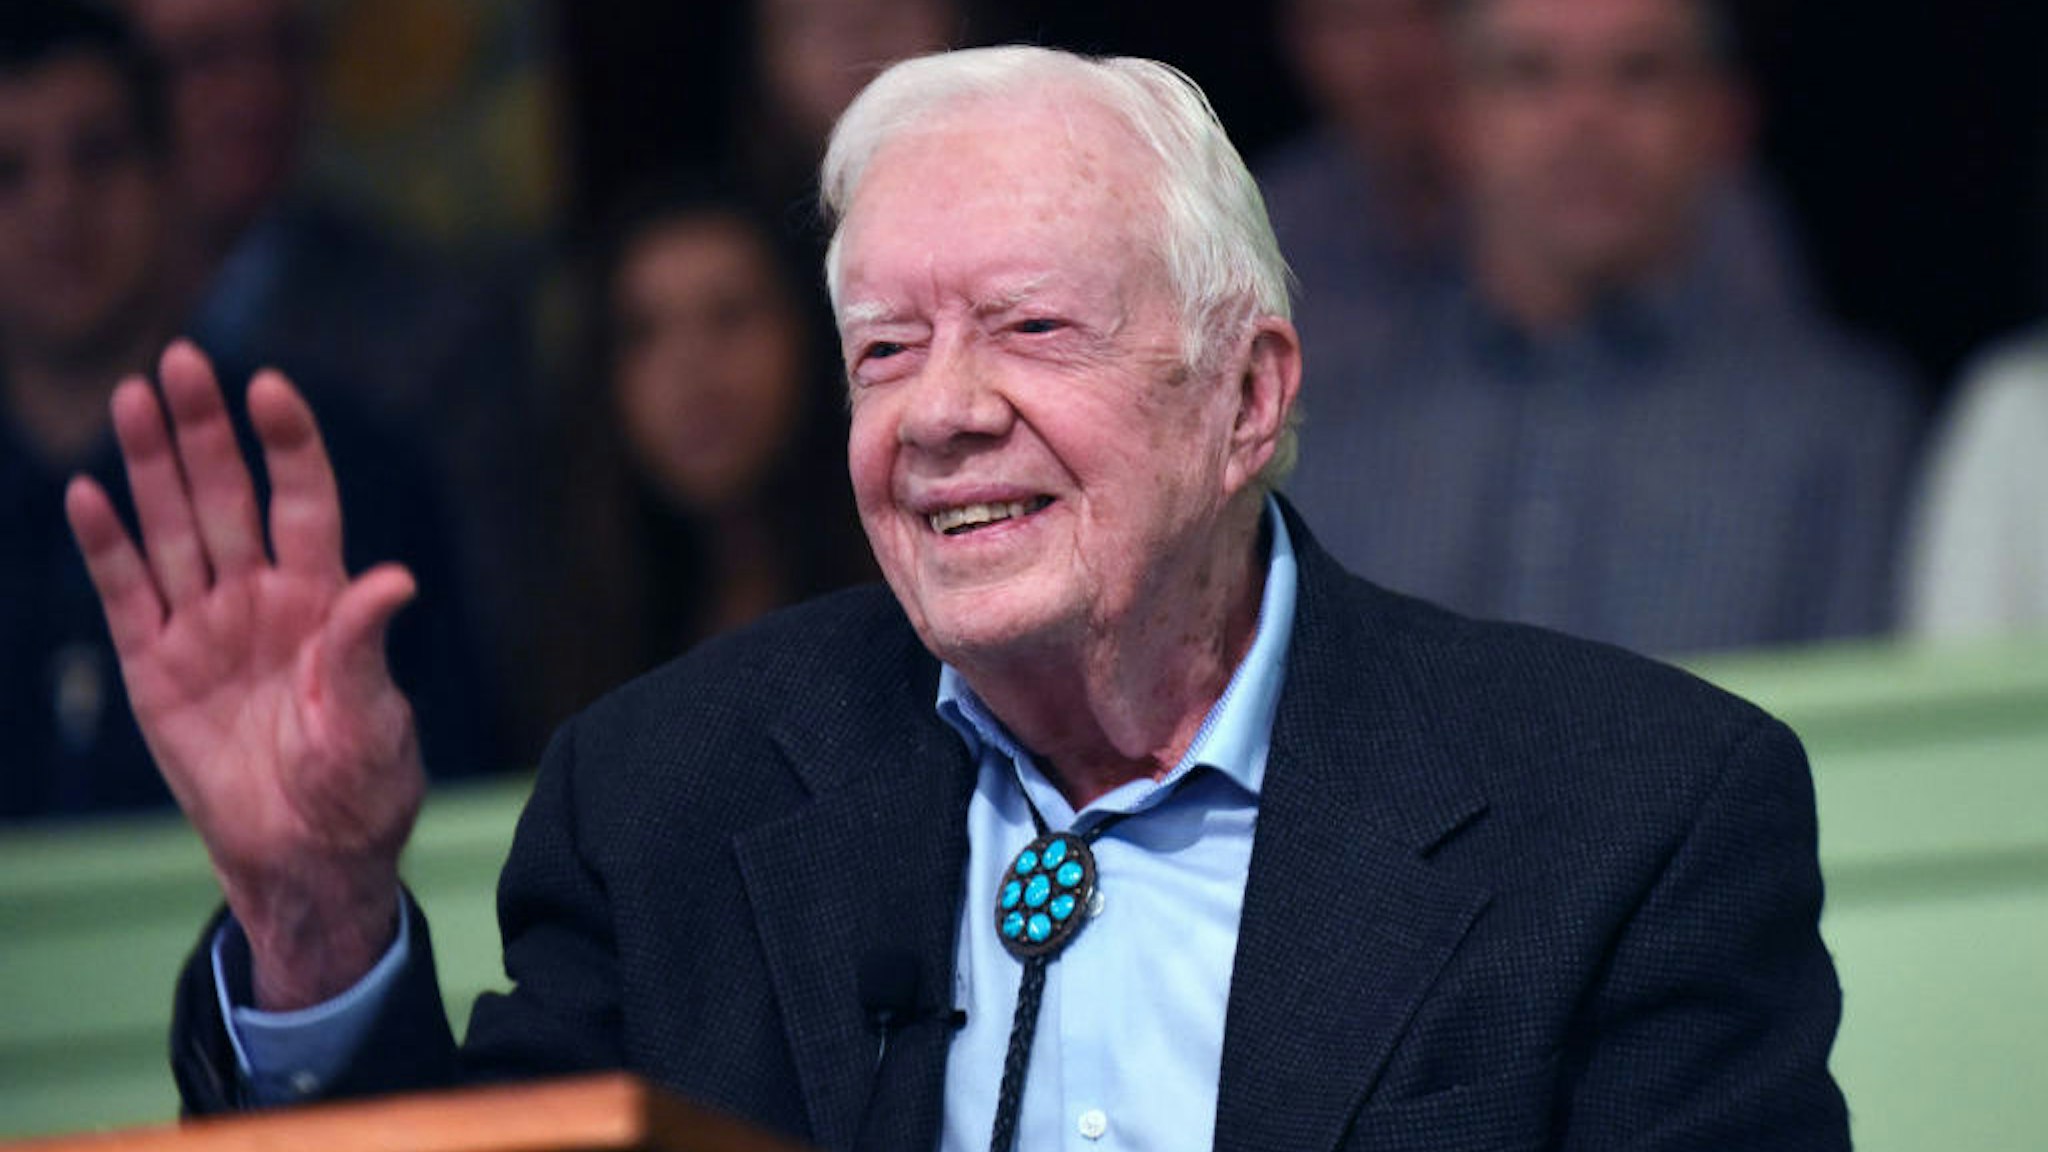 Former U.S. President Jimmy Carter waves to the congregation after teaching Sunday school at Maranatha Baptist Church in his hometown of Plains, Georgia on April 28, 2019. Carter, 94, has taught Sunday school at the church on a regular basis since leaving the White House in 1981, drawing hundreds of visitors who arrive hours before the 10:00 am lesson in order to get a seat and have a photograph taken with the former President and former First Lady Rosalynn Carter. (Photo by Paul Hennessy/NurPhoto via Getty Images)